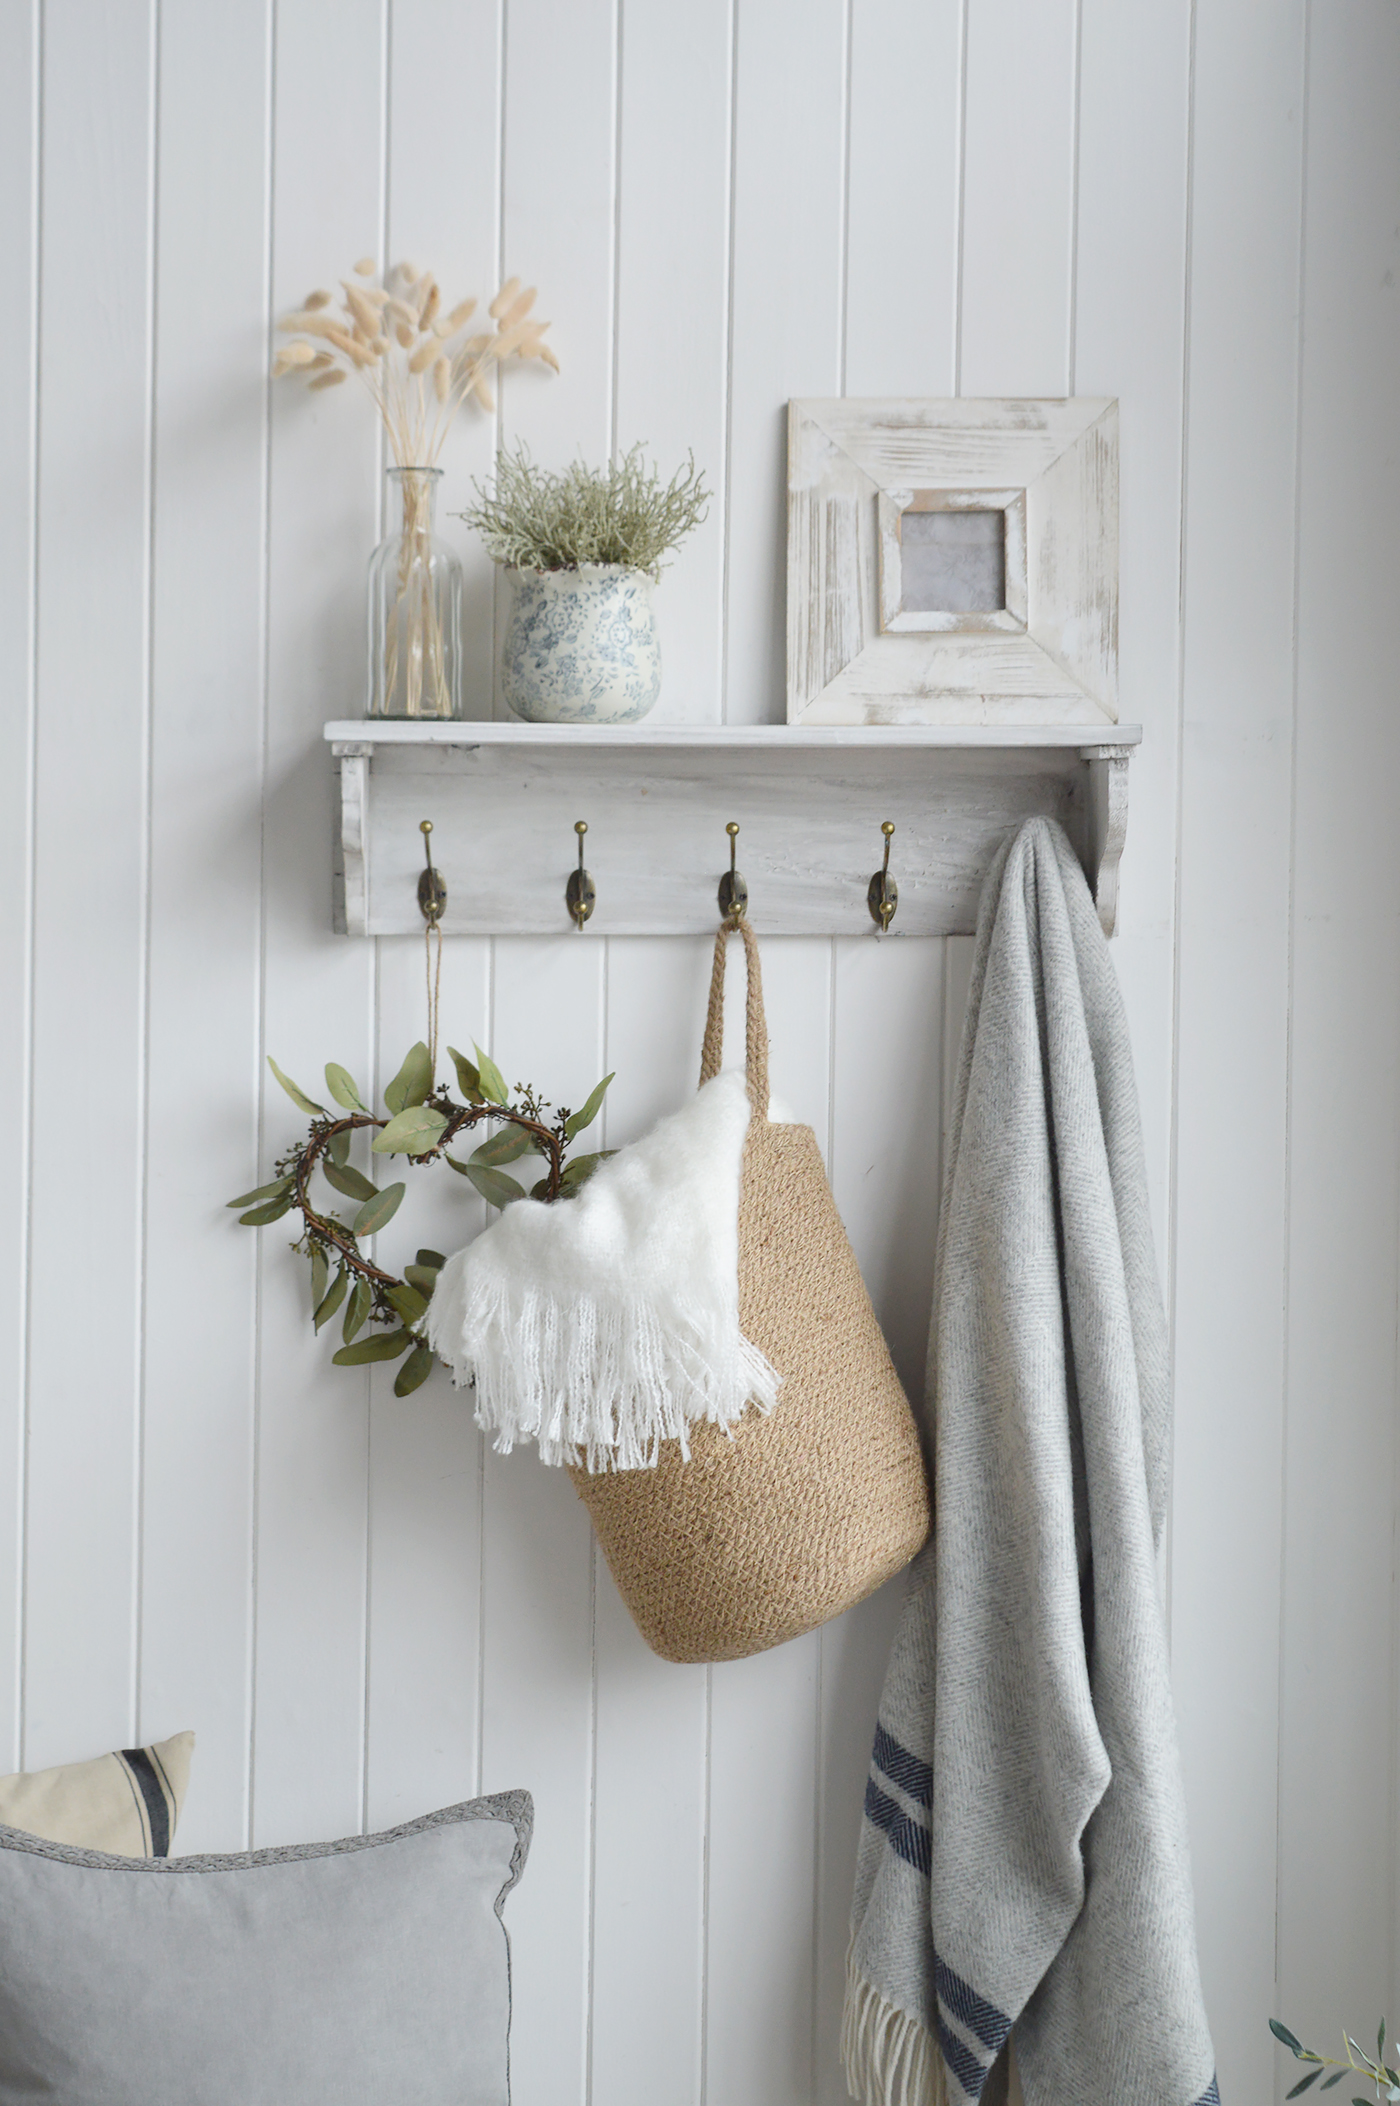 Pawtucket grey wooden wall shelf with hooks from The White Lighthouse. White Furniture and accessories for the bedroom, bathroom, hall and living room in coastal, New England and country homes and interiors